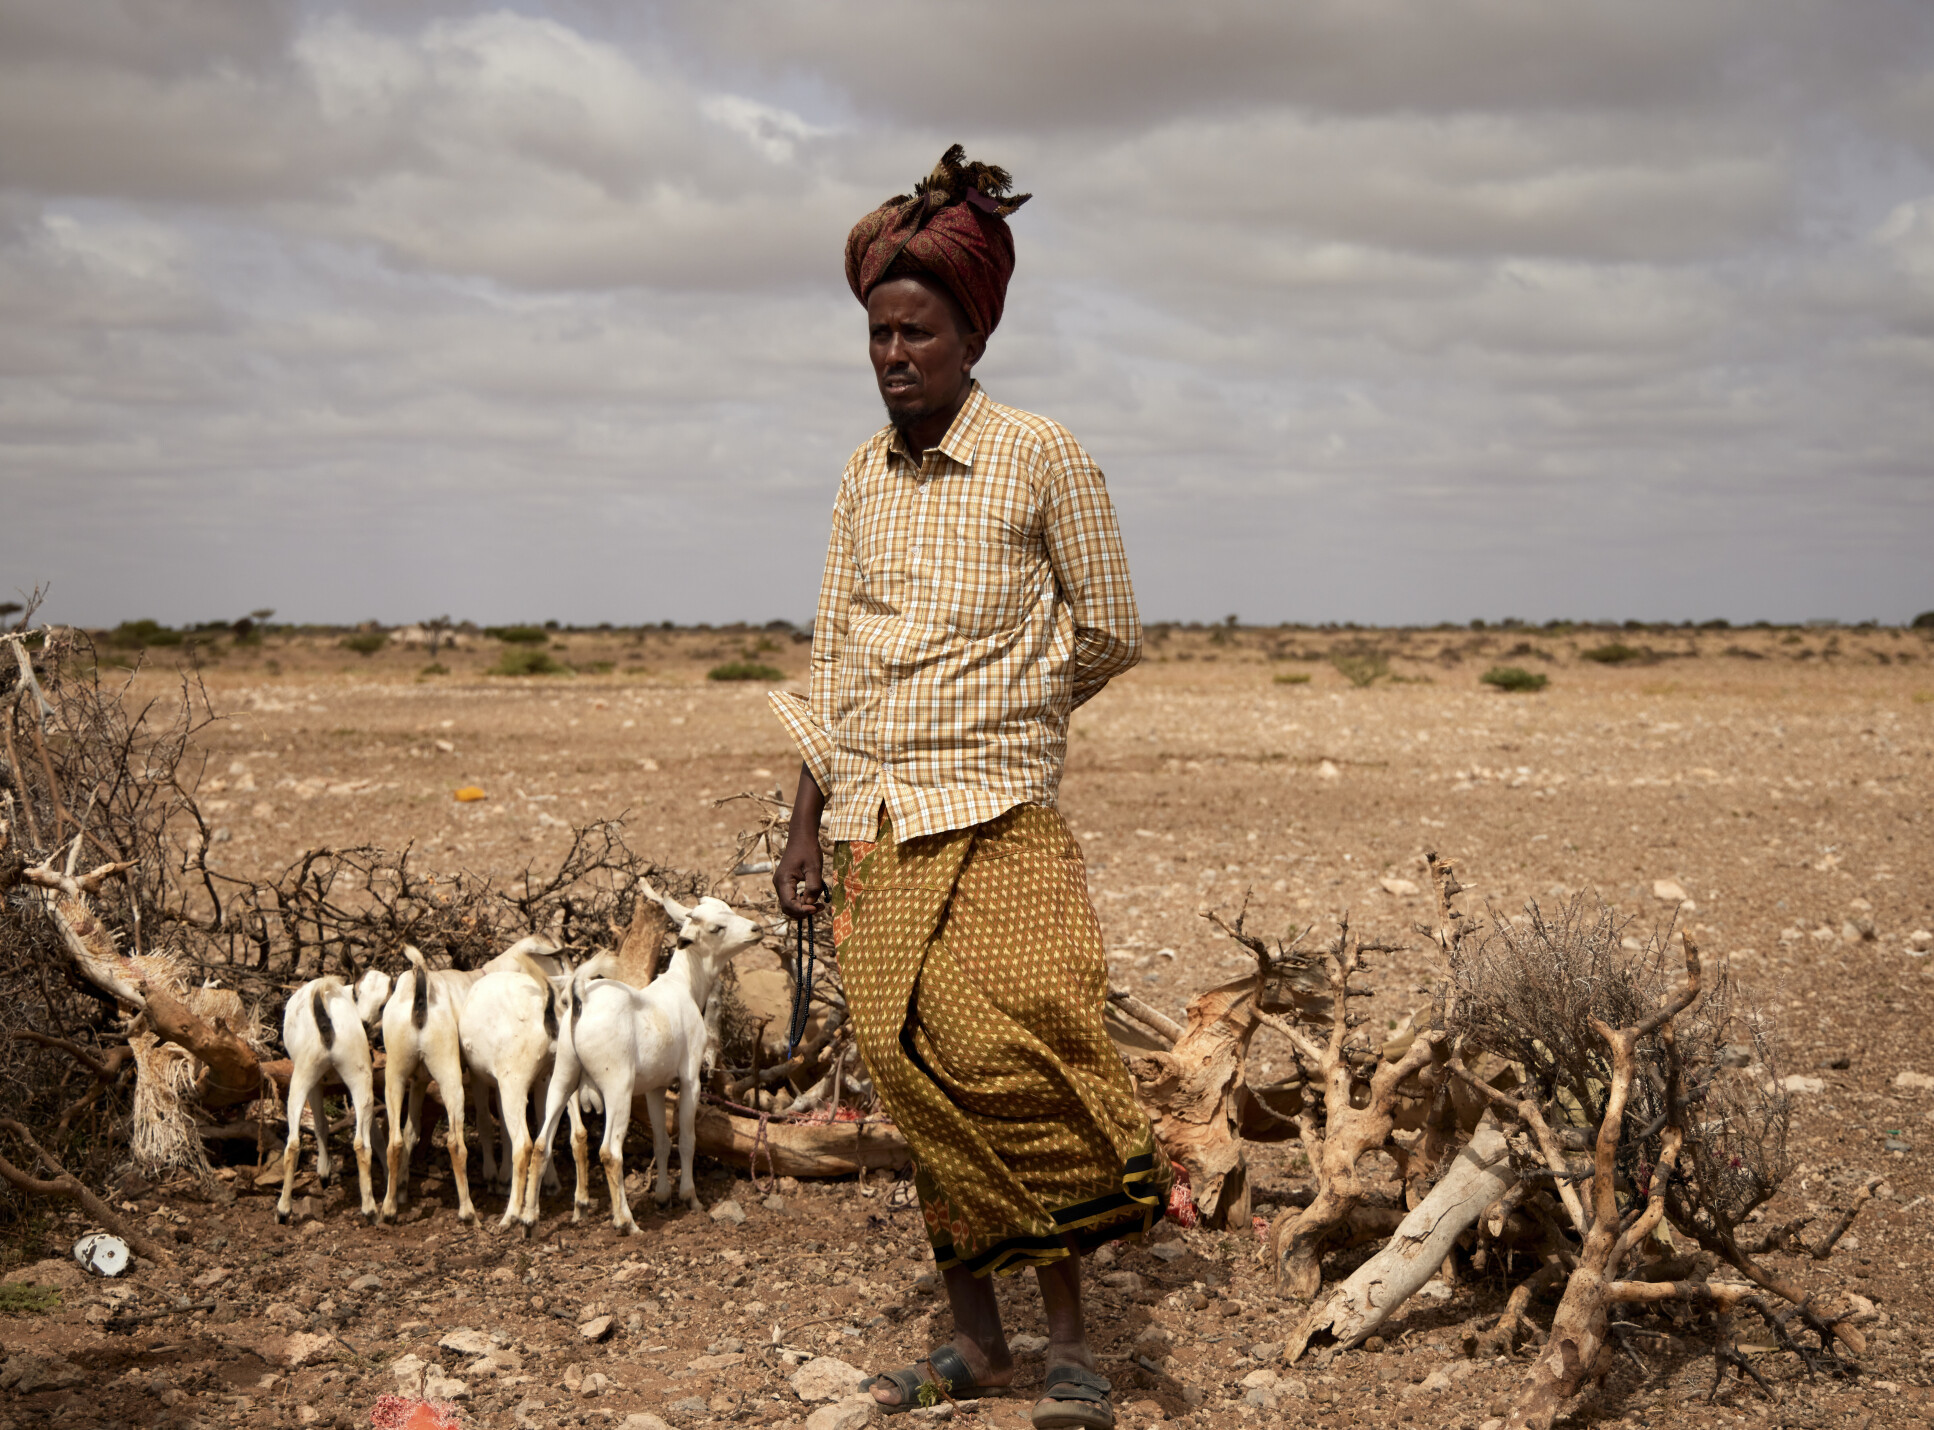 A portrait of a herder standing in the desert in front of four small goats.